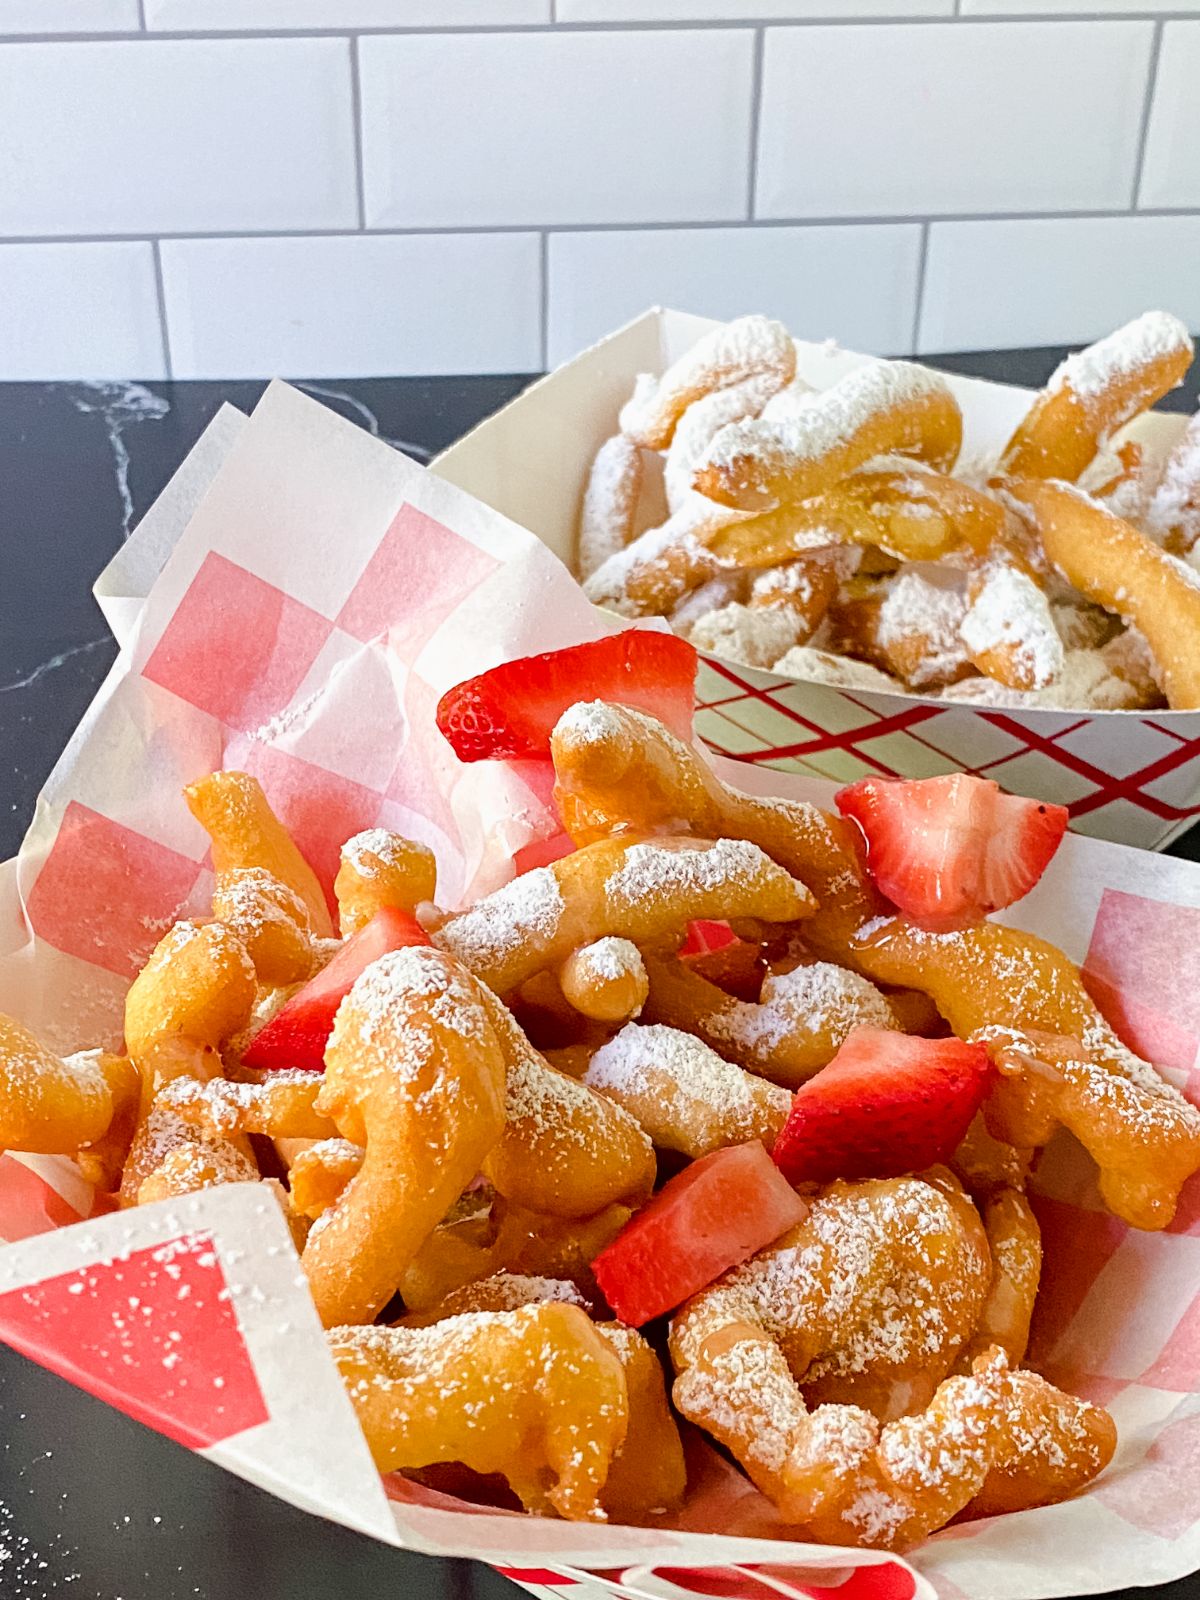 white and red paper under funnel cake fries